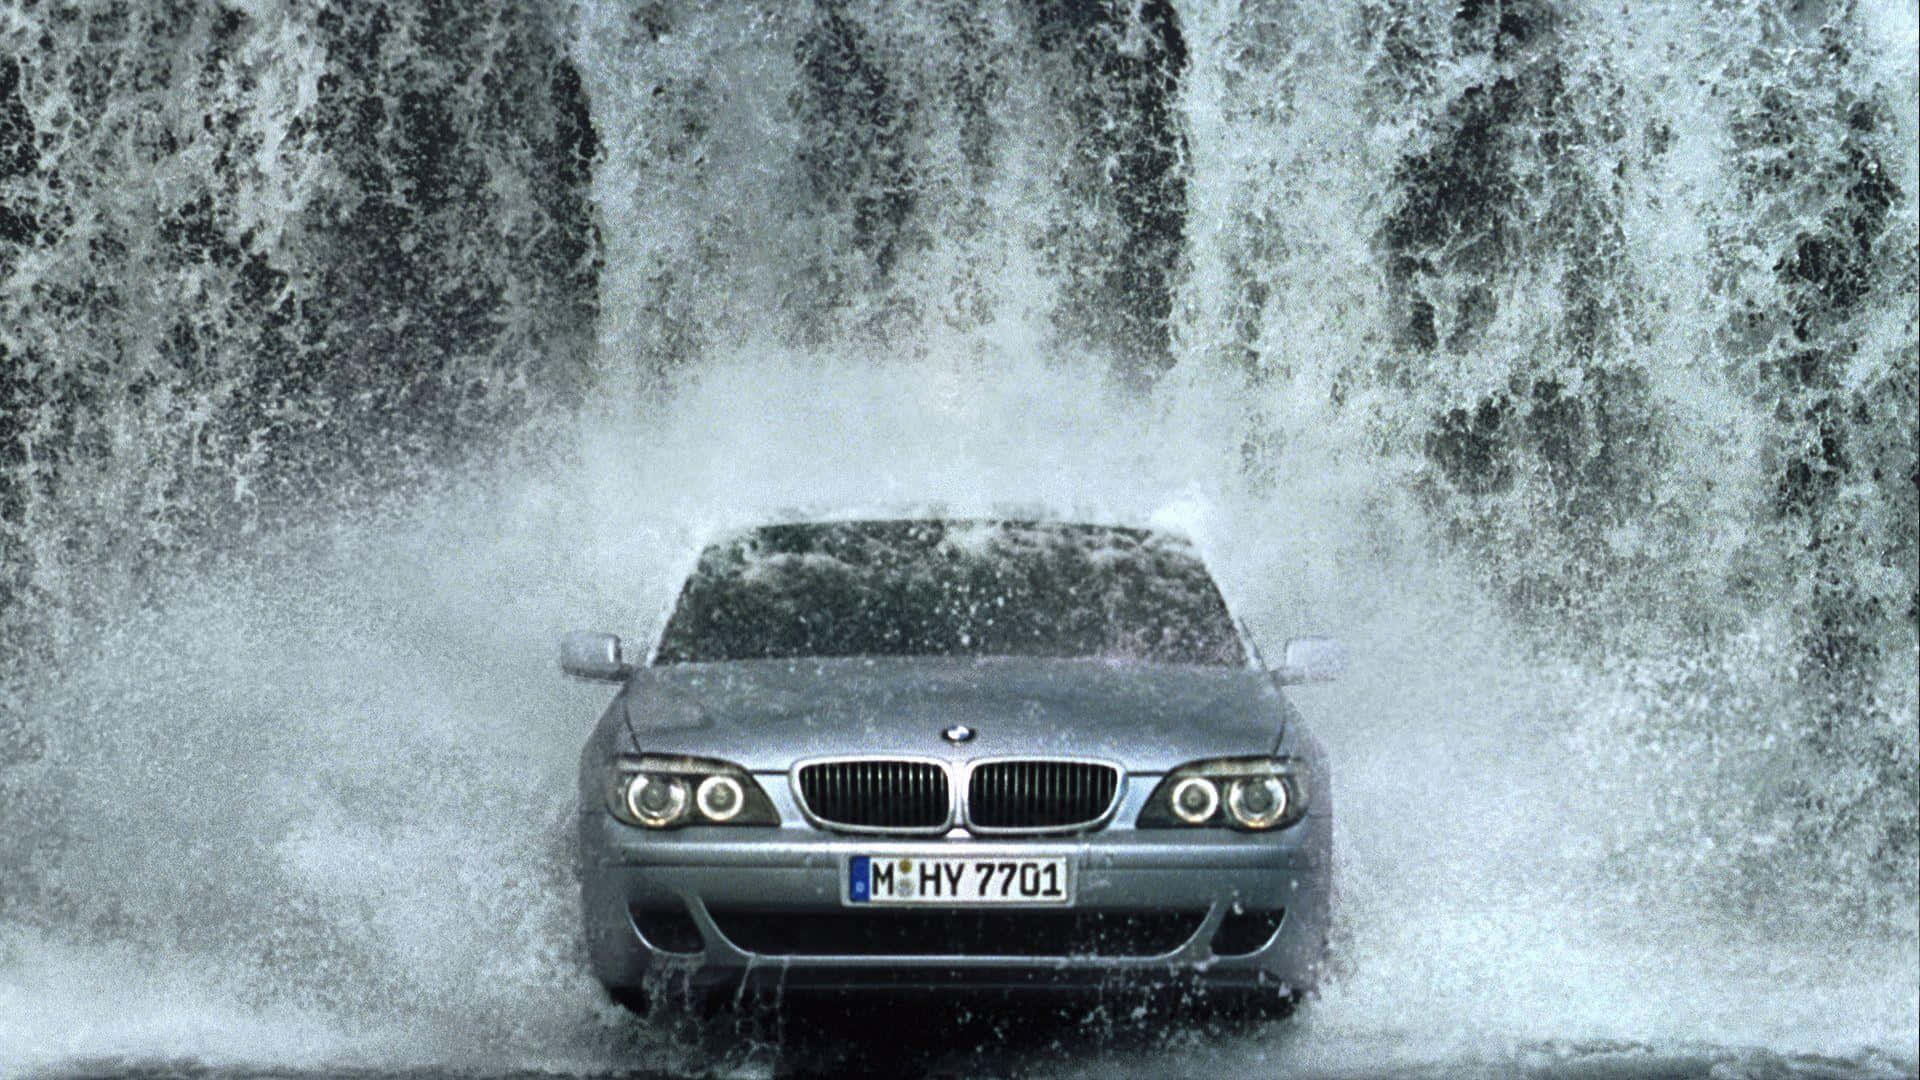 Keep Your Car Fresh with Our Professional Car Wash Services